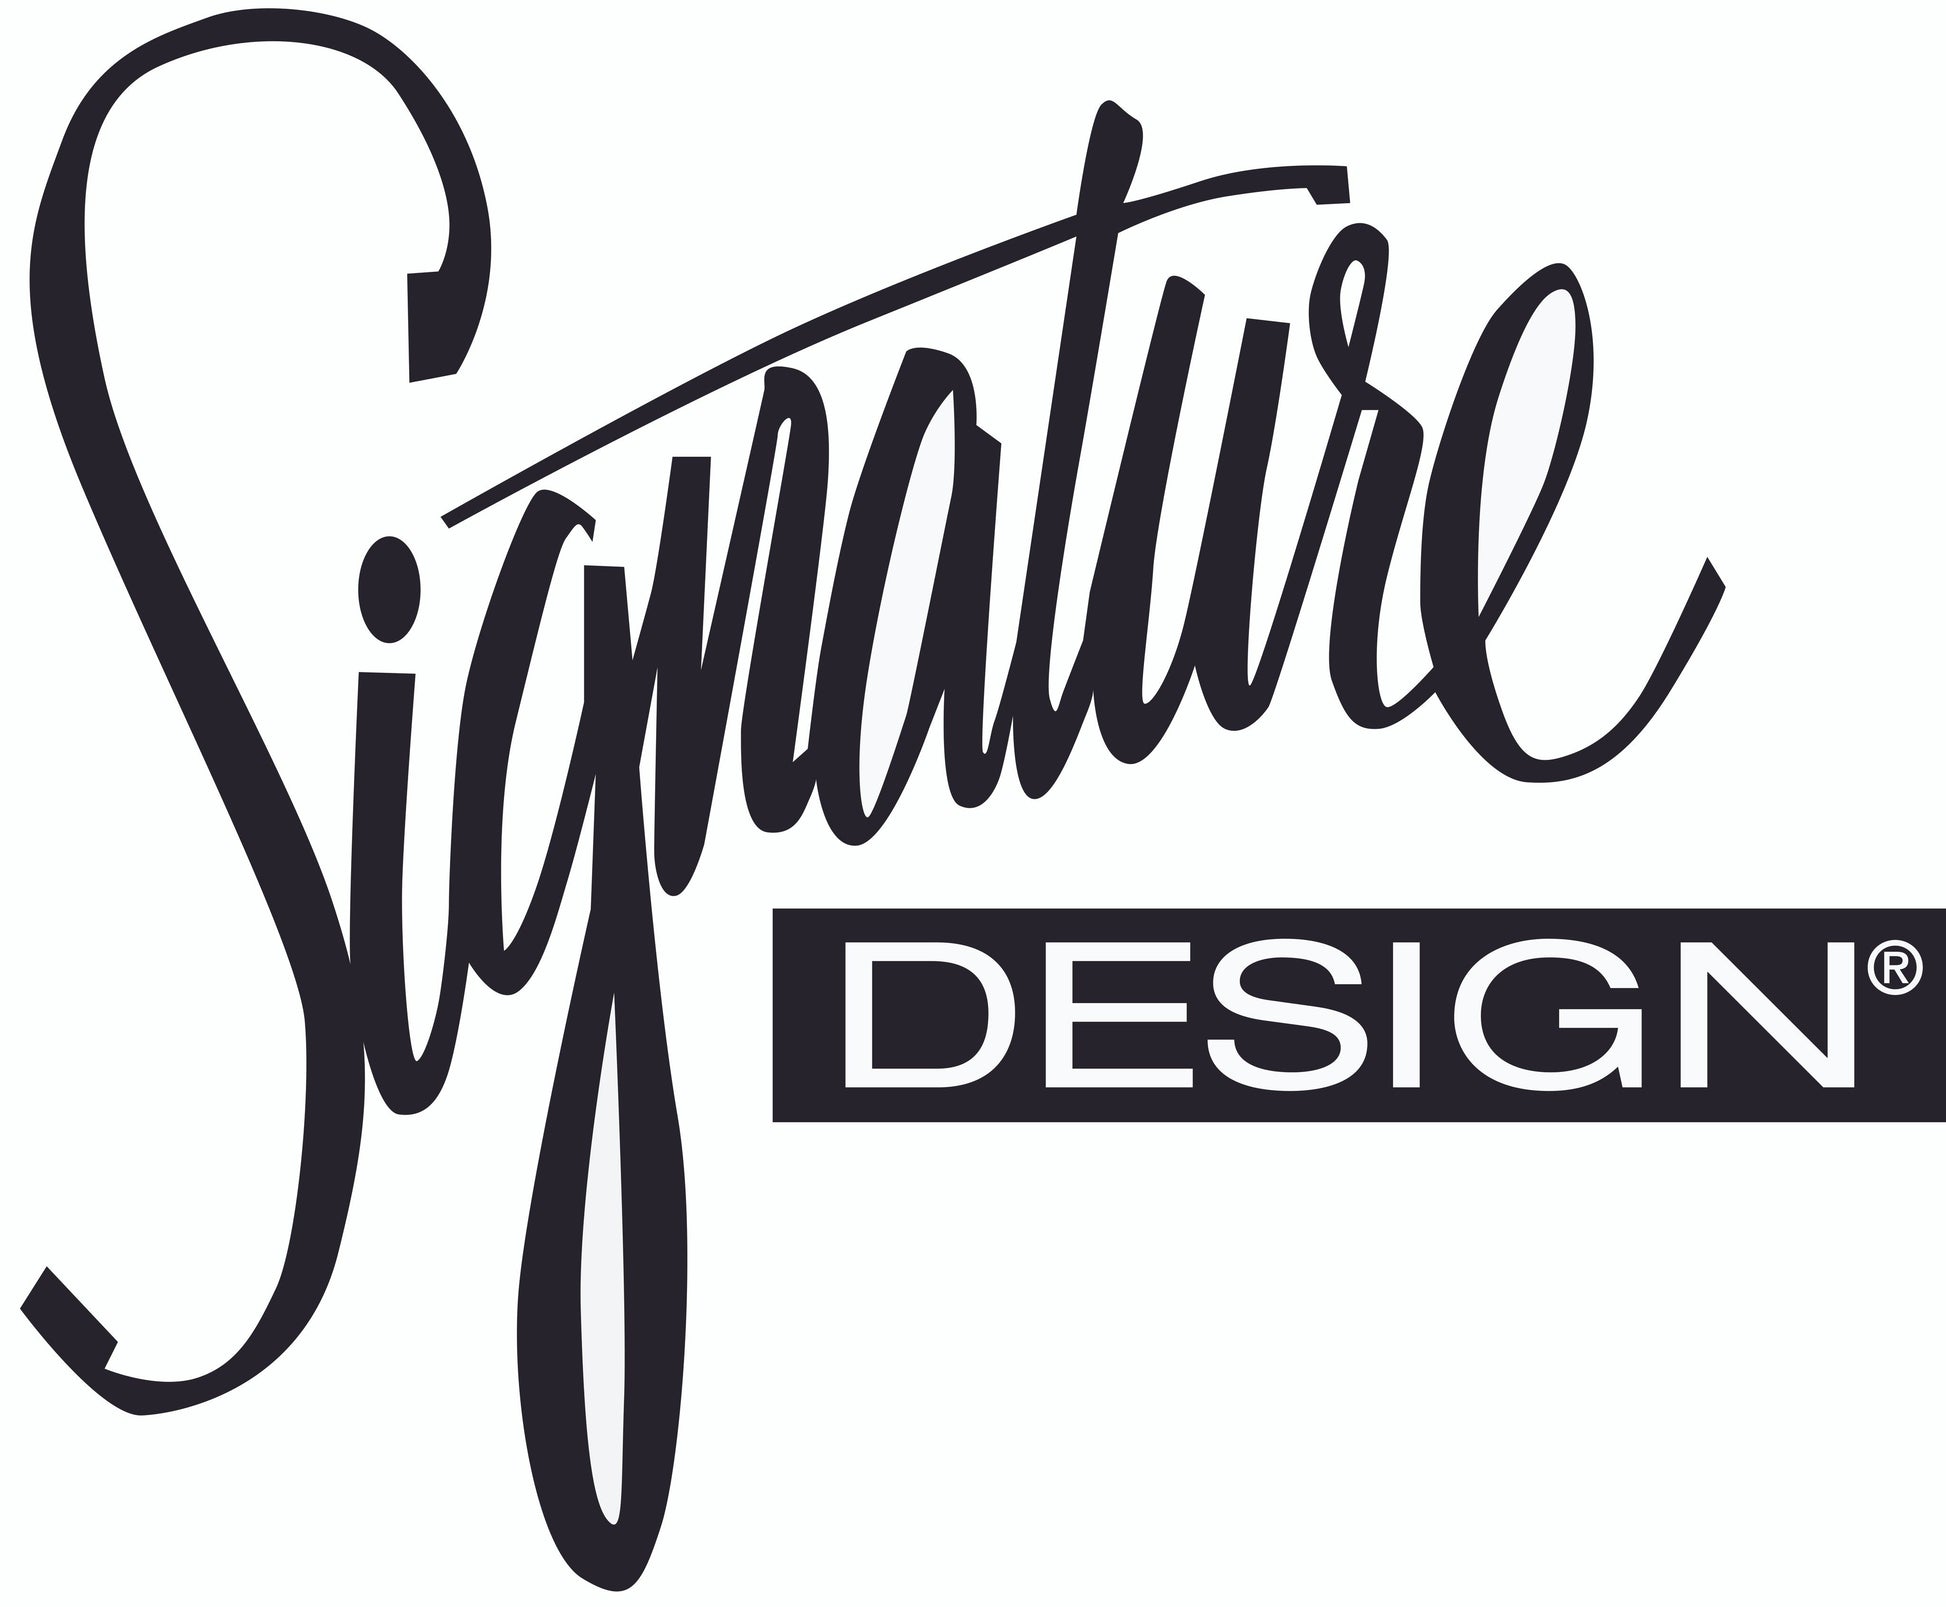 Socalle Five Drawer Chest Signature Design by Ashley®